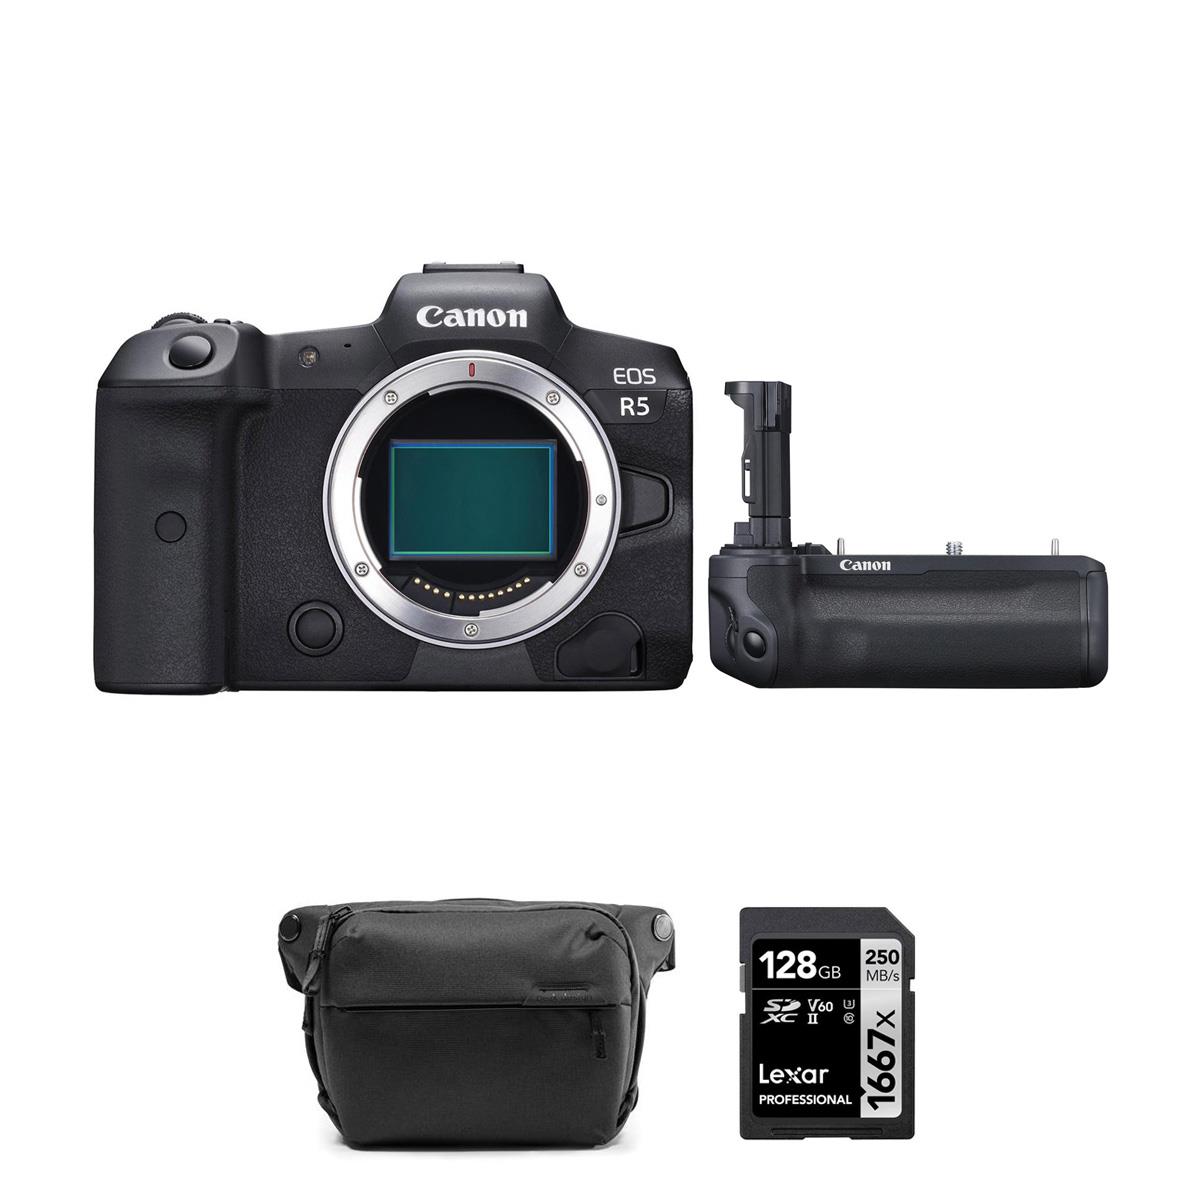 Image of Canon EOS R5 Mirrorless Digital Camera Body with Battery Grip Kit